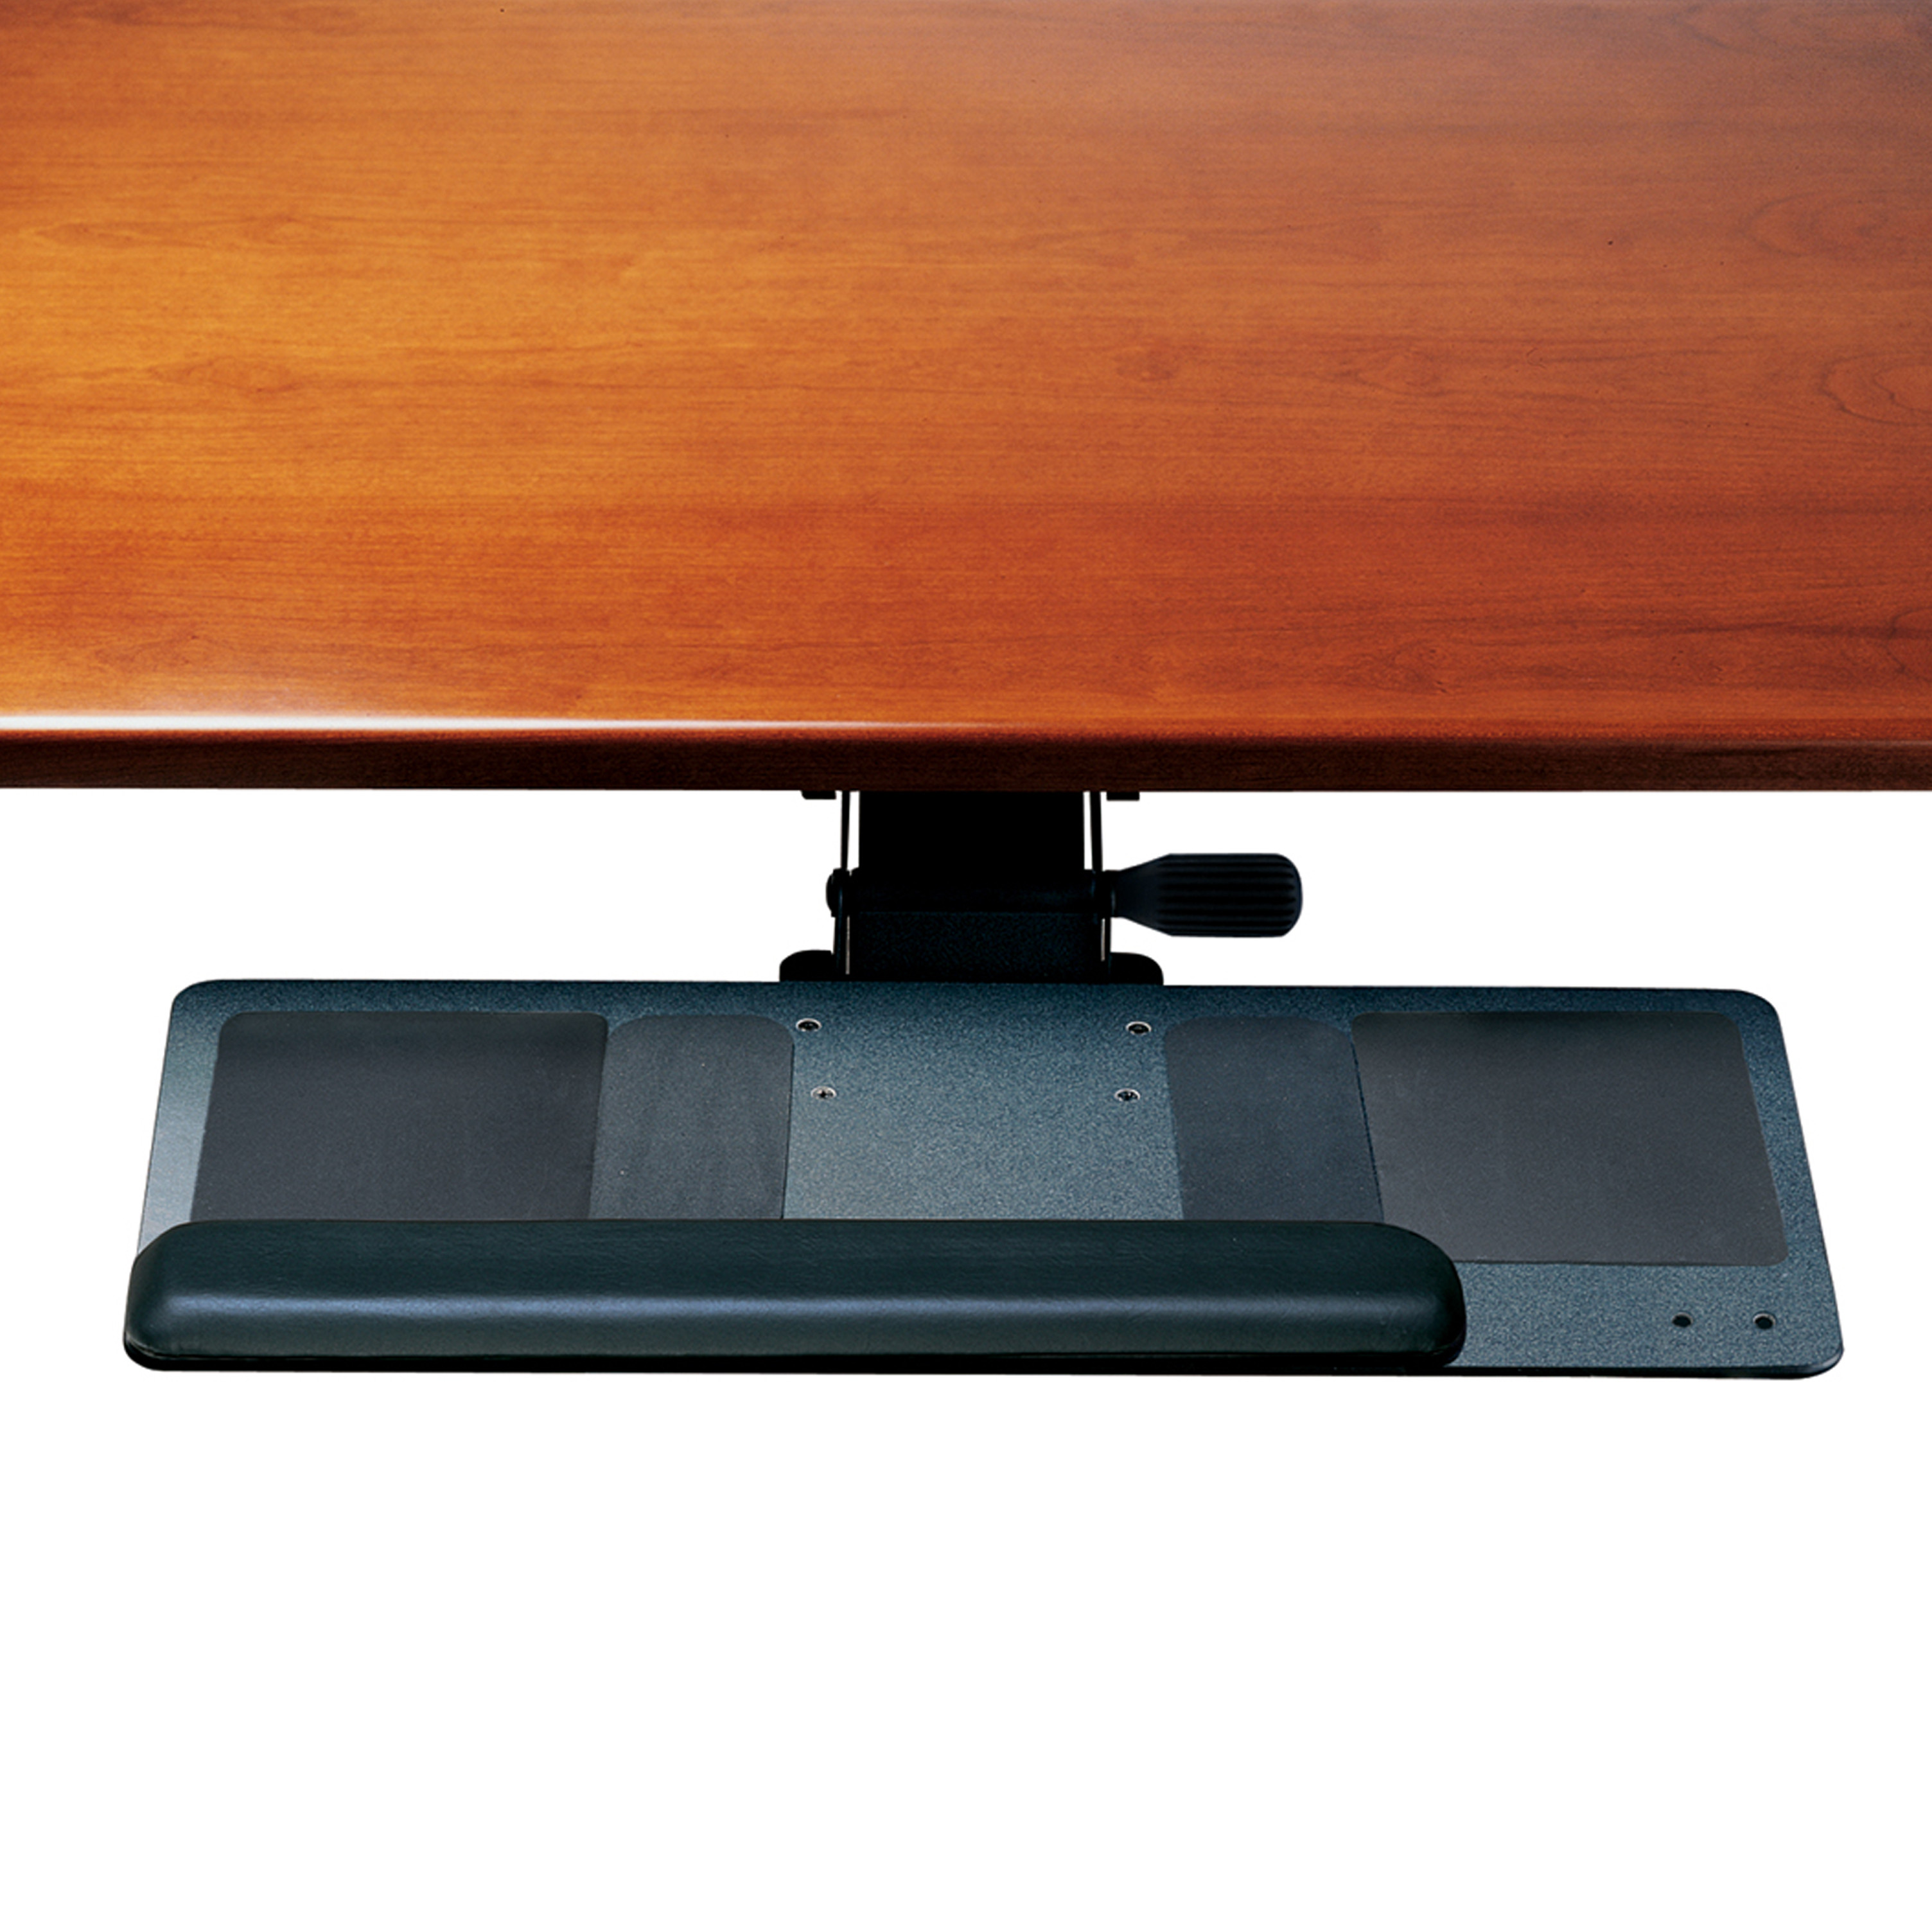 2G Keyboard System by Humanscale